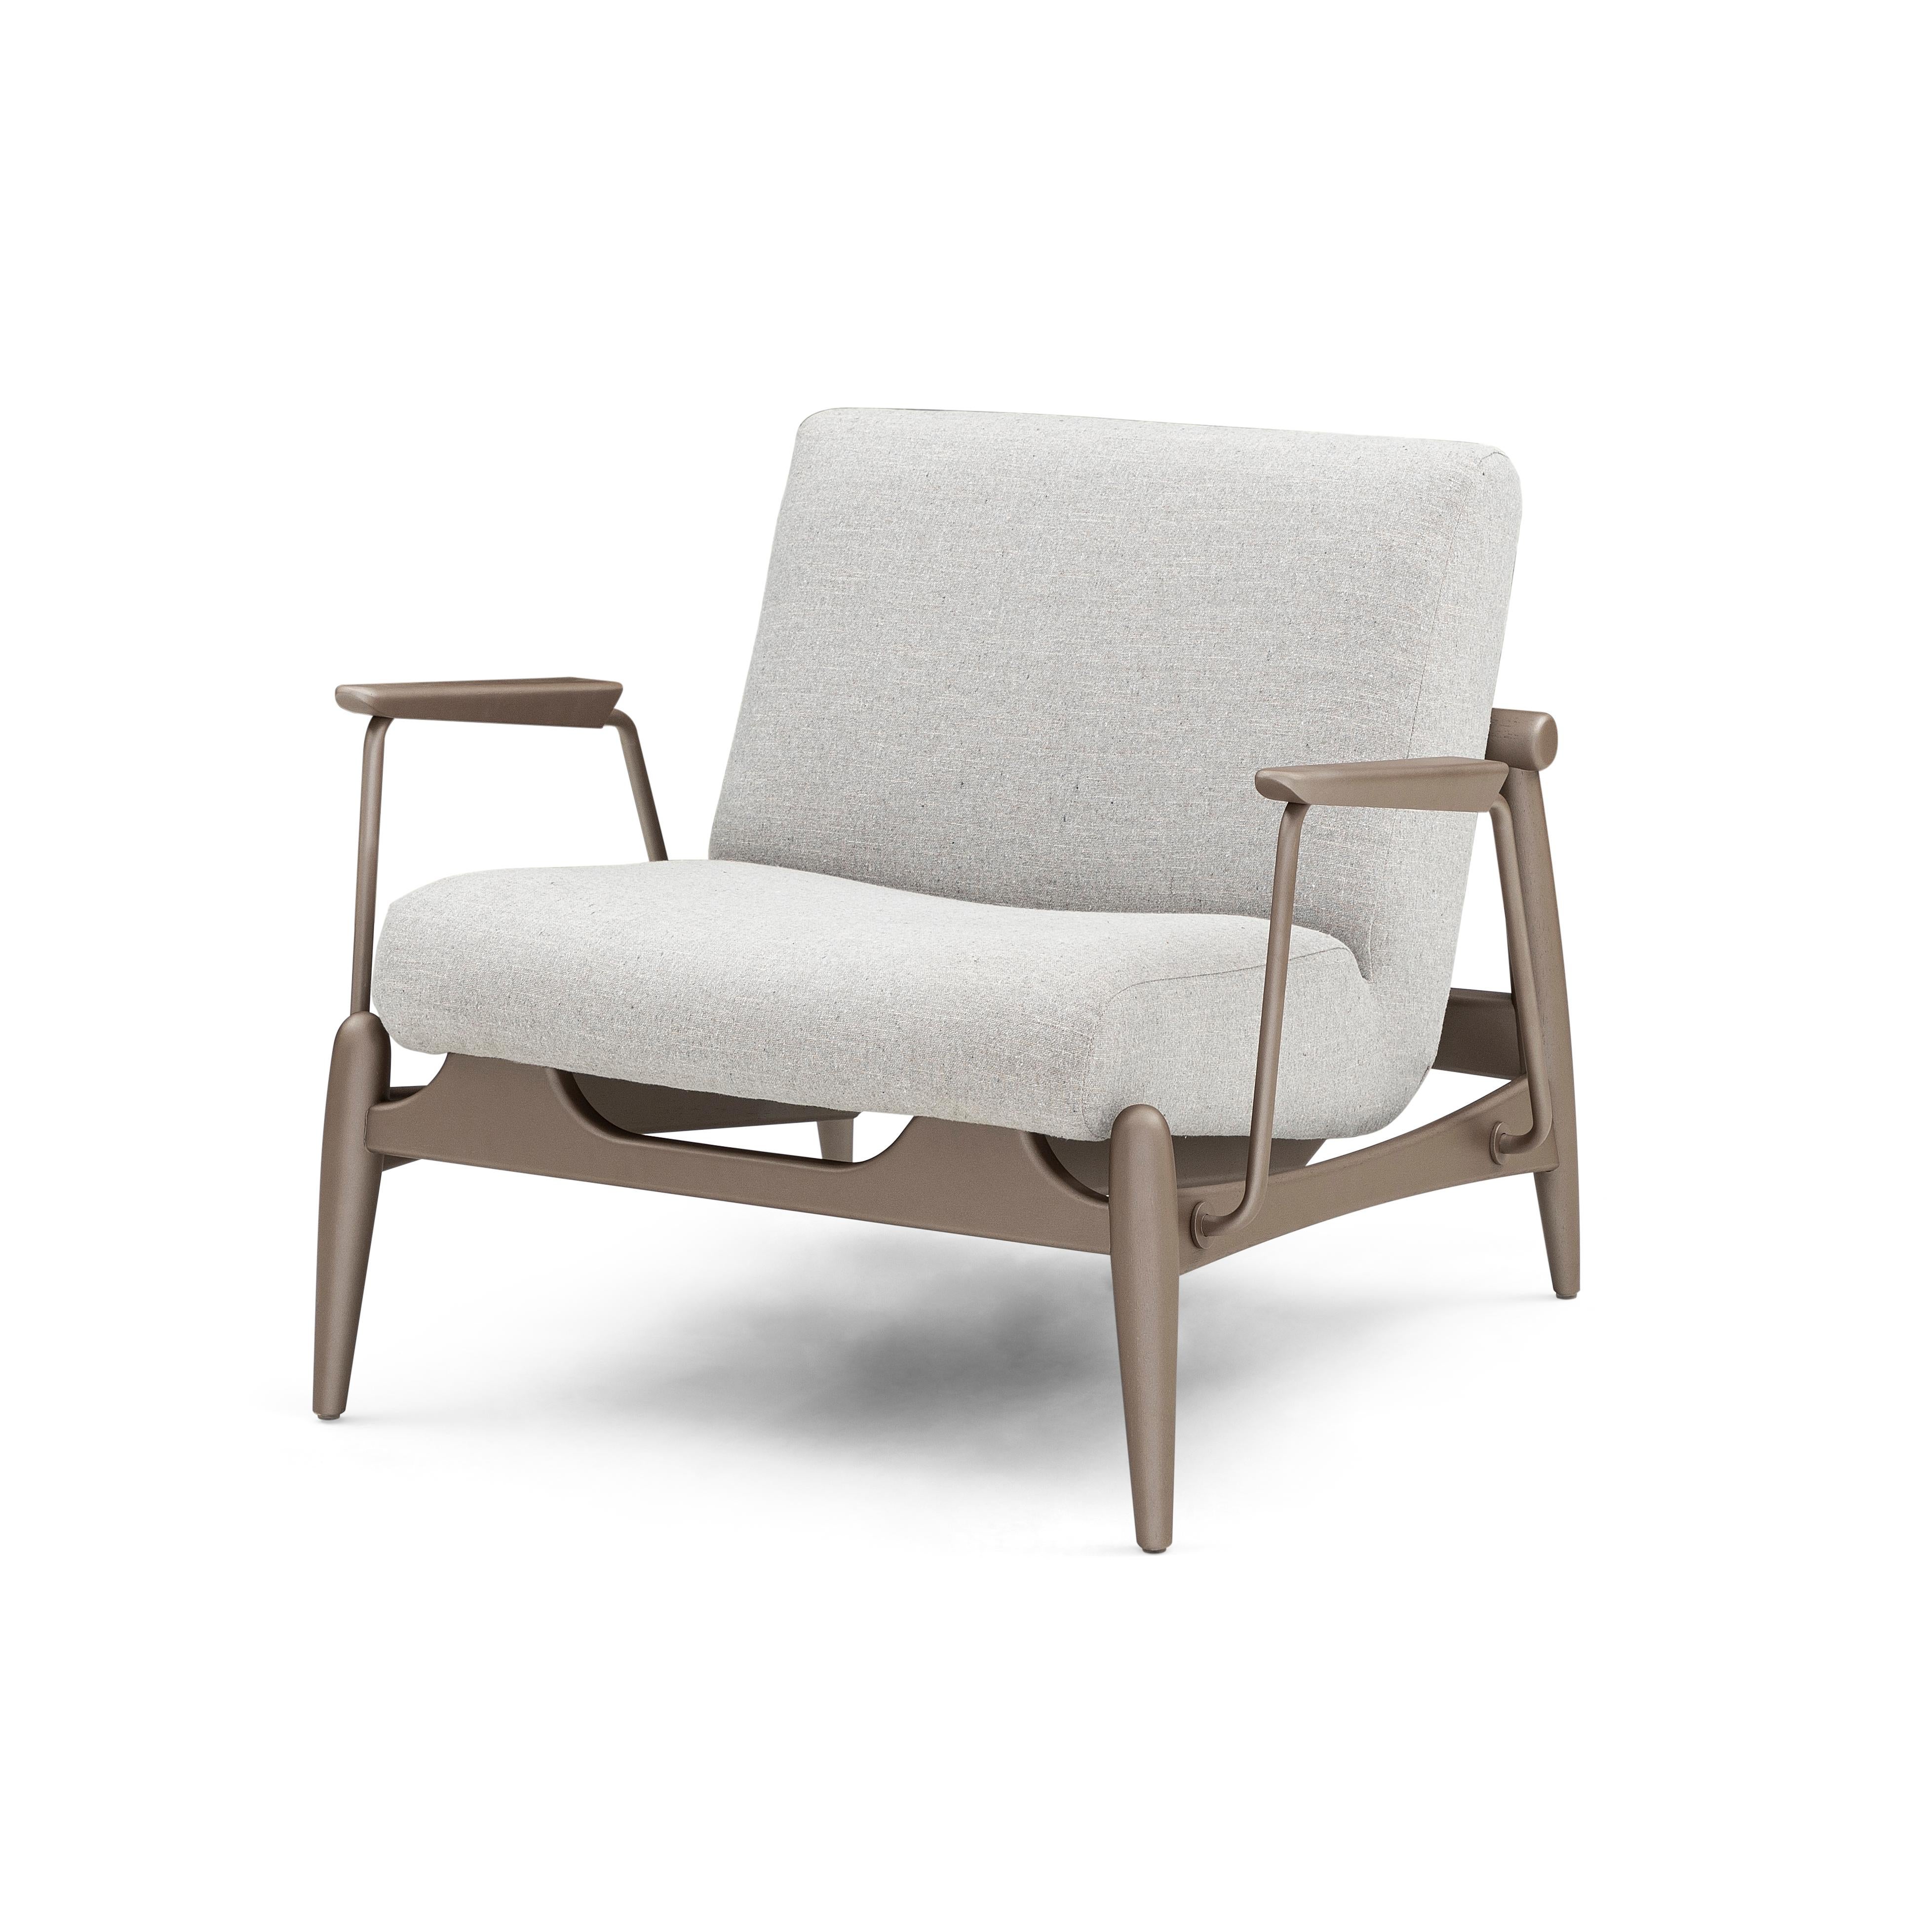 The Win armchair features metal trimmings with a brown wood finish frame, wrapped in a beautiful light gray fabric. Our amazing Uultis design team has created this armchair for your comfort and support, that you can place in any room of your house.